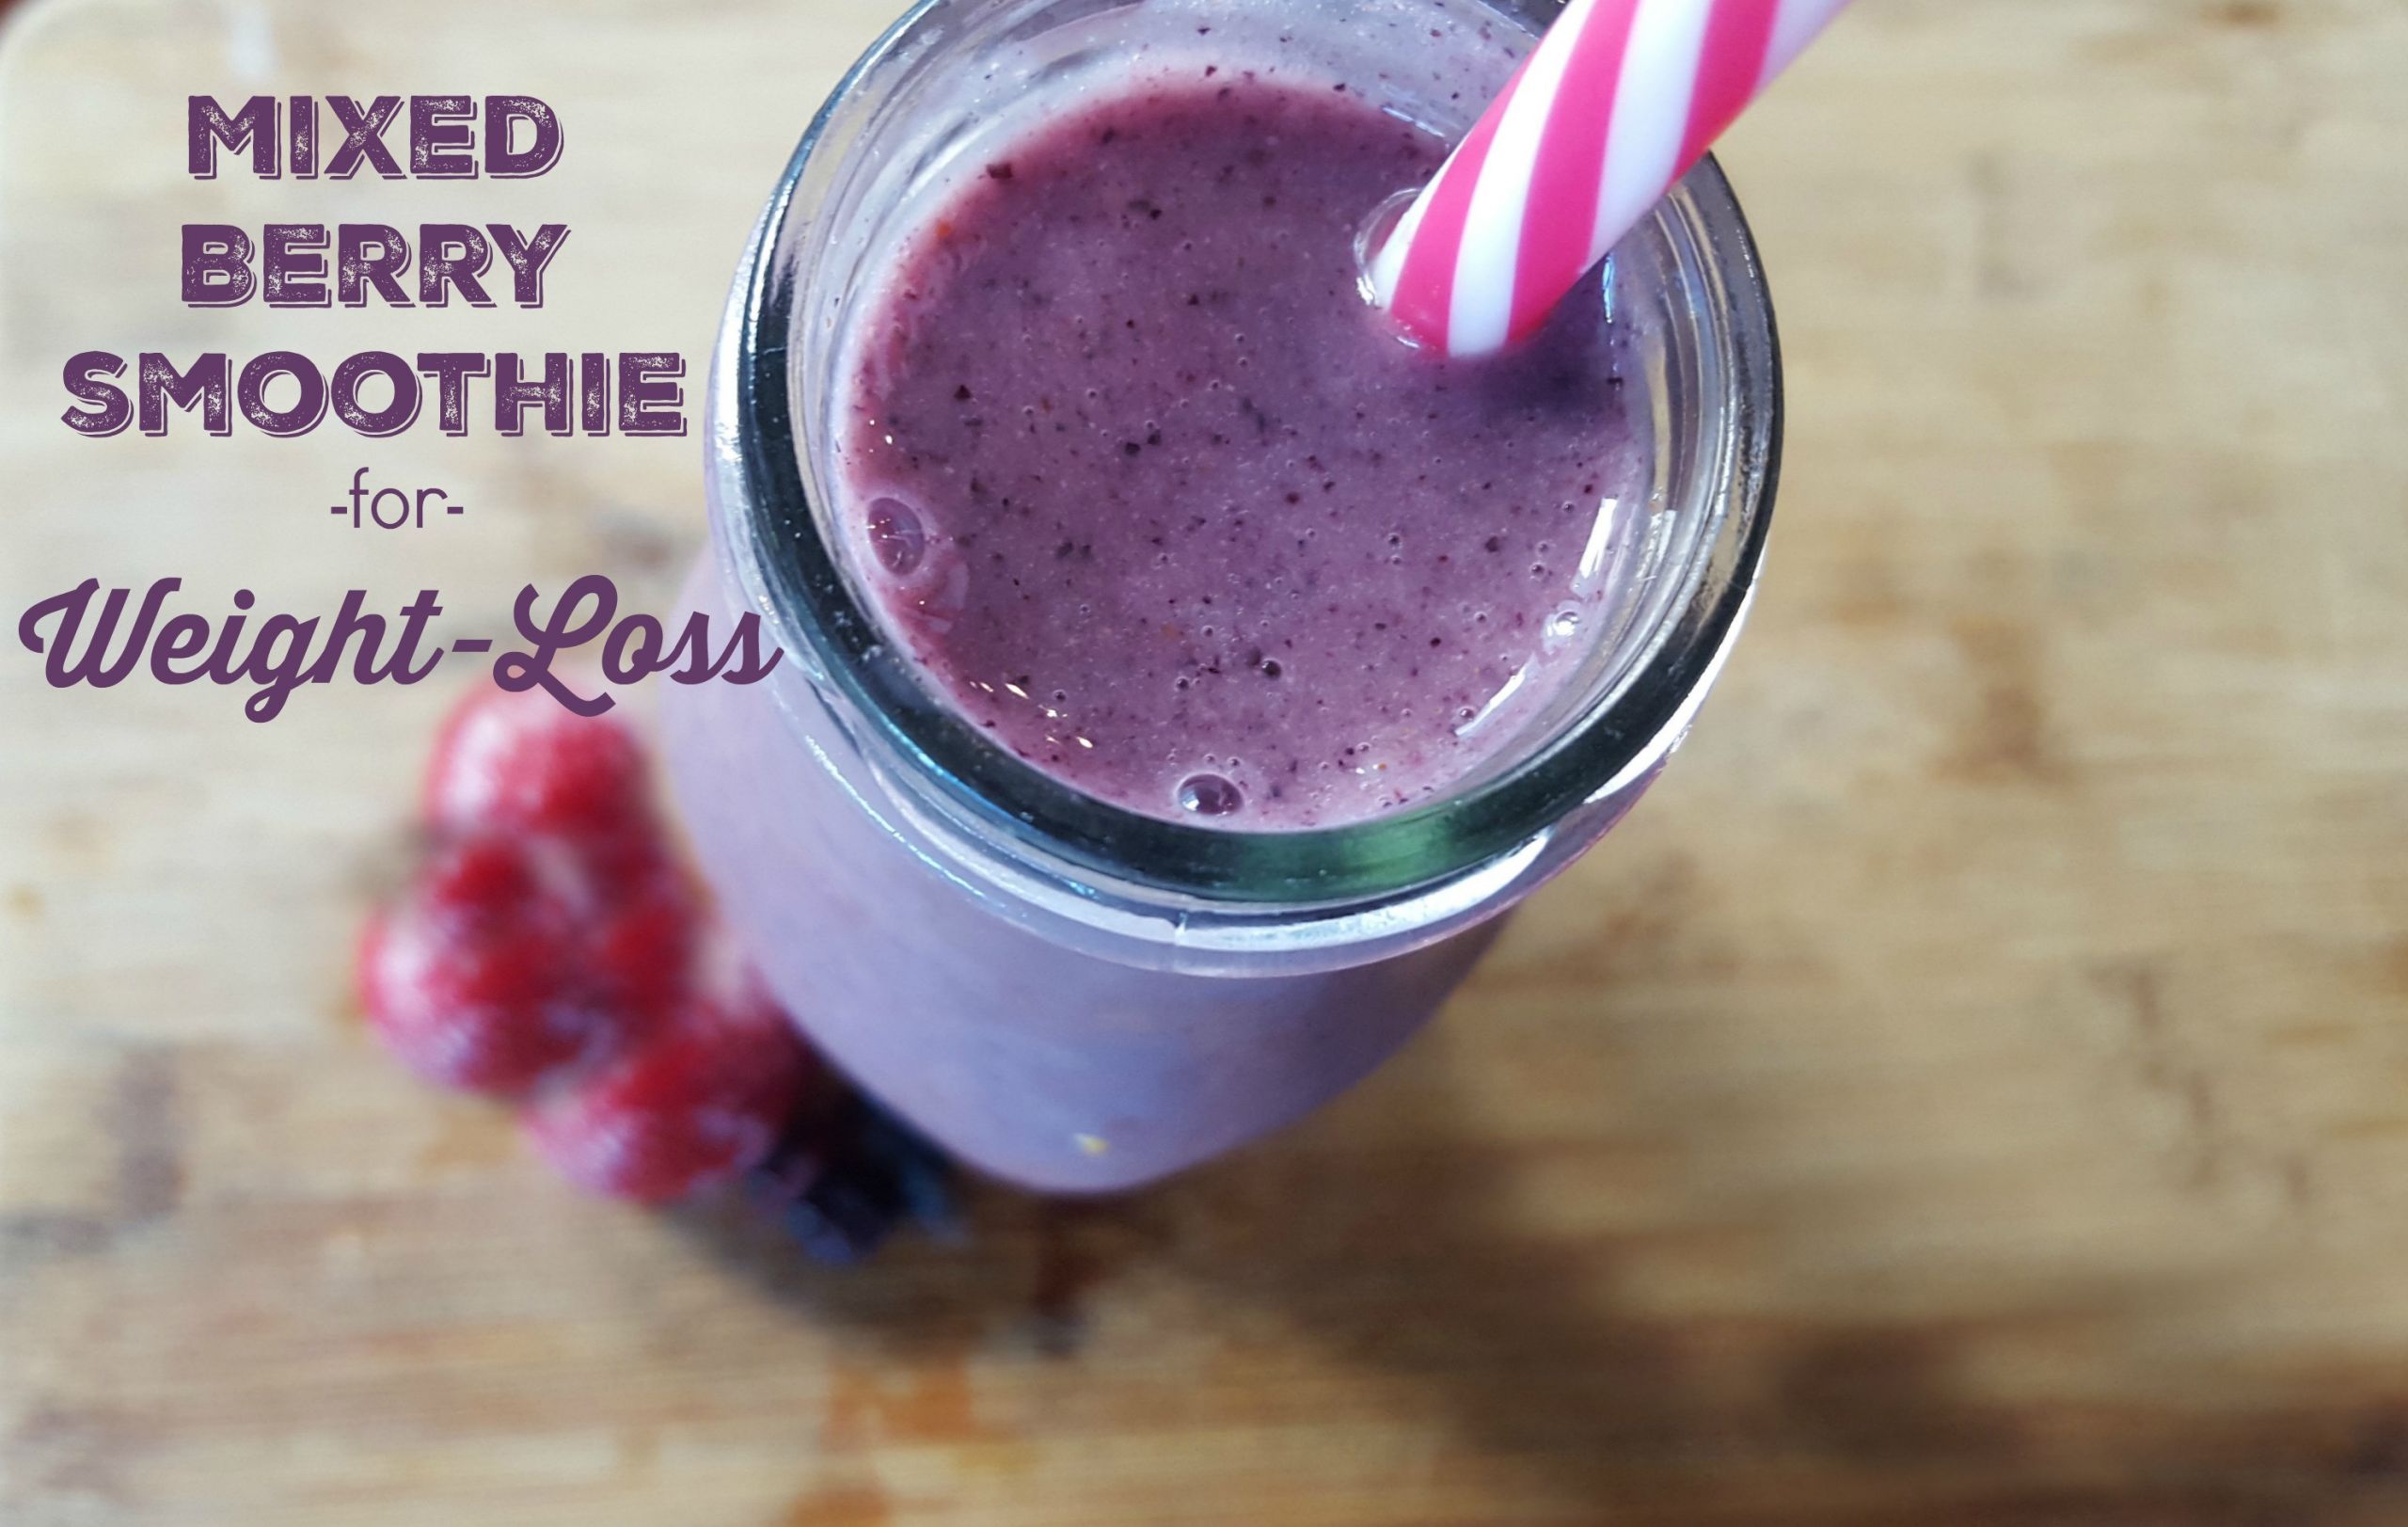 Berry Smoothies For Weight Loss
 Jump Start Weight Loss with a Mixed Berry Smoothie